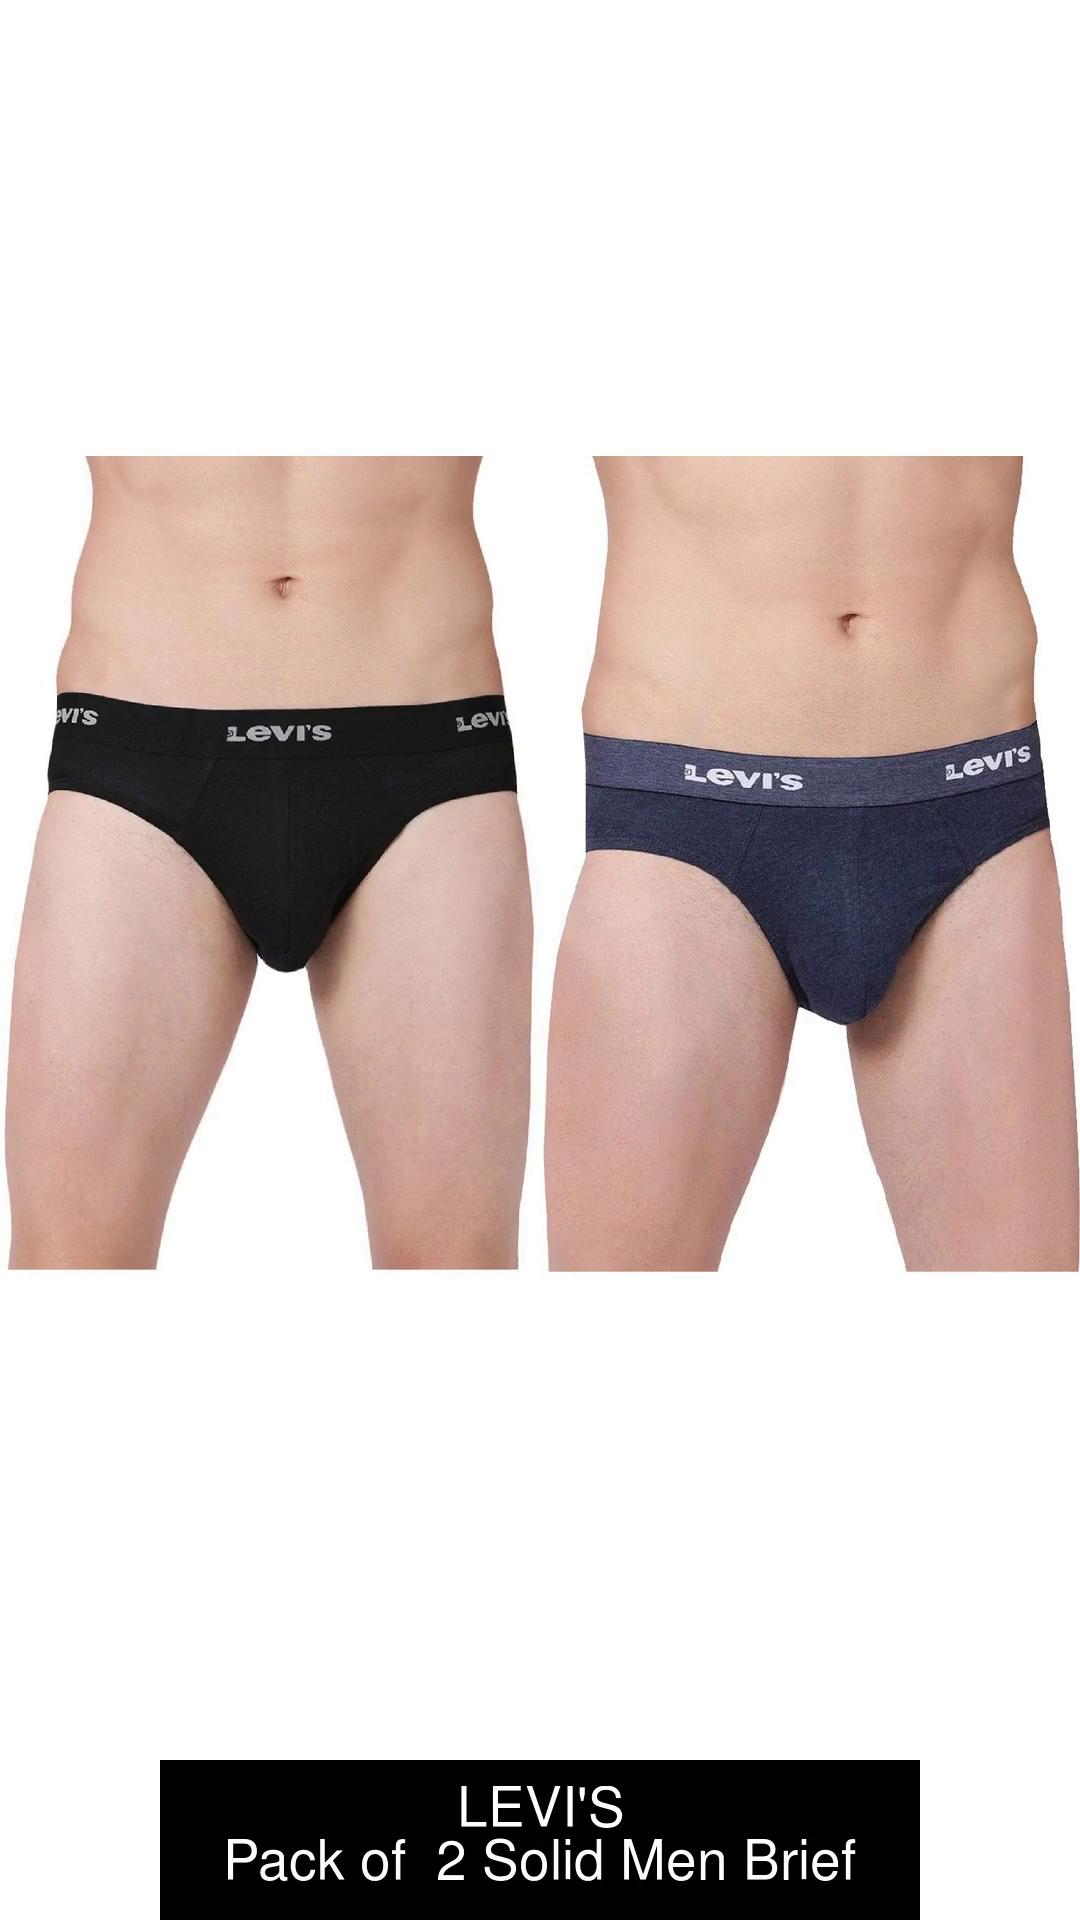 LEVI'S Men Contoured Double Pouch, Tag Free Comfort & Smartskin Technology  Style# 009 Neo Brief - Buy LEVI'S Men Contoured Double Pouch, Tag Free  Comfort & Smartskin Technology Style# 009 Neo Brief